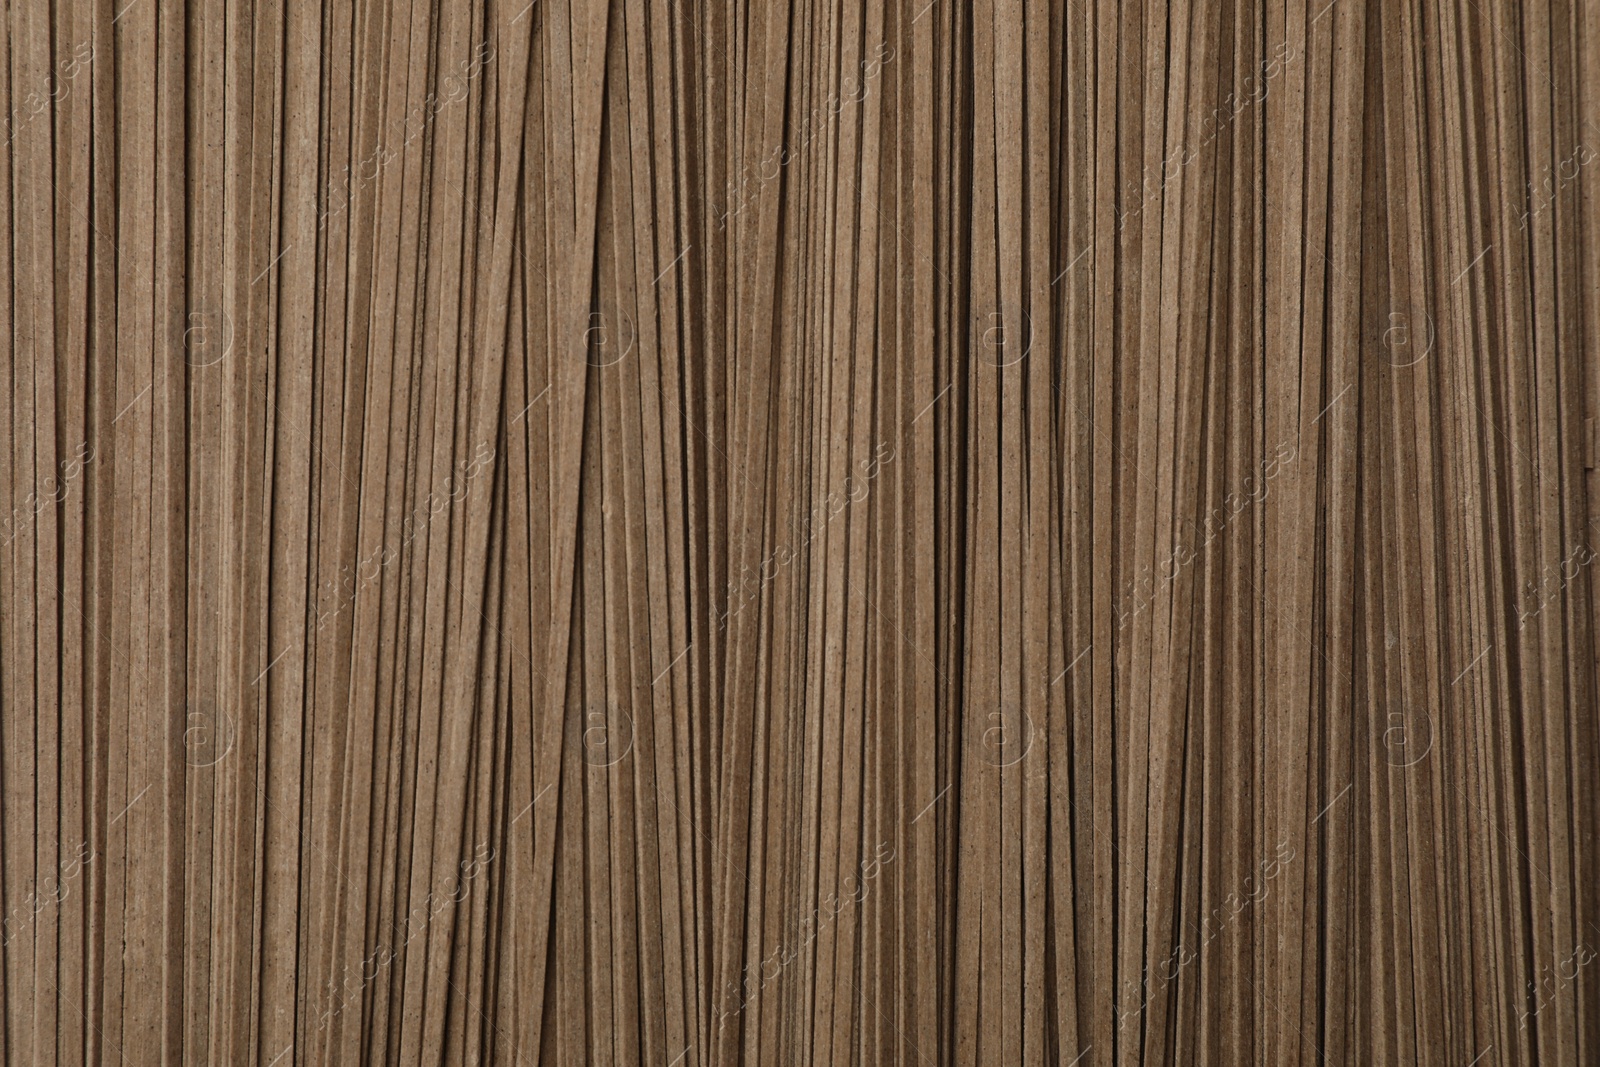 Photo of Uncooked buckwheat noodles (soba) as background, top view